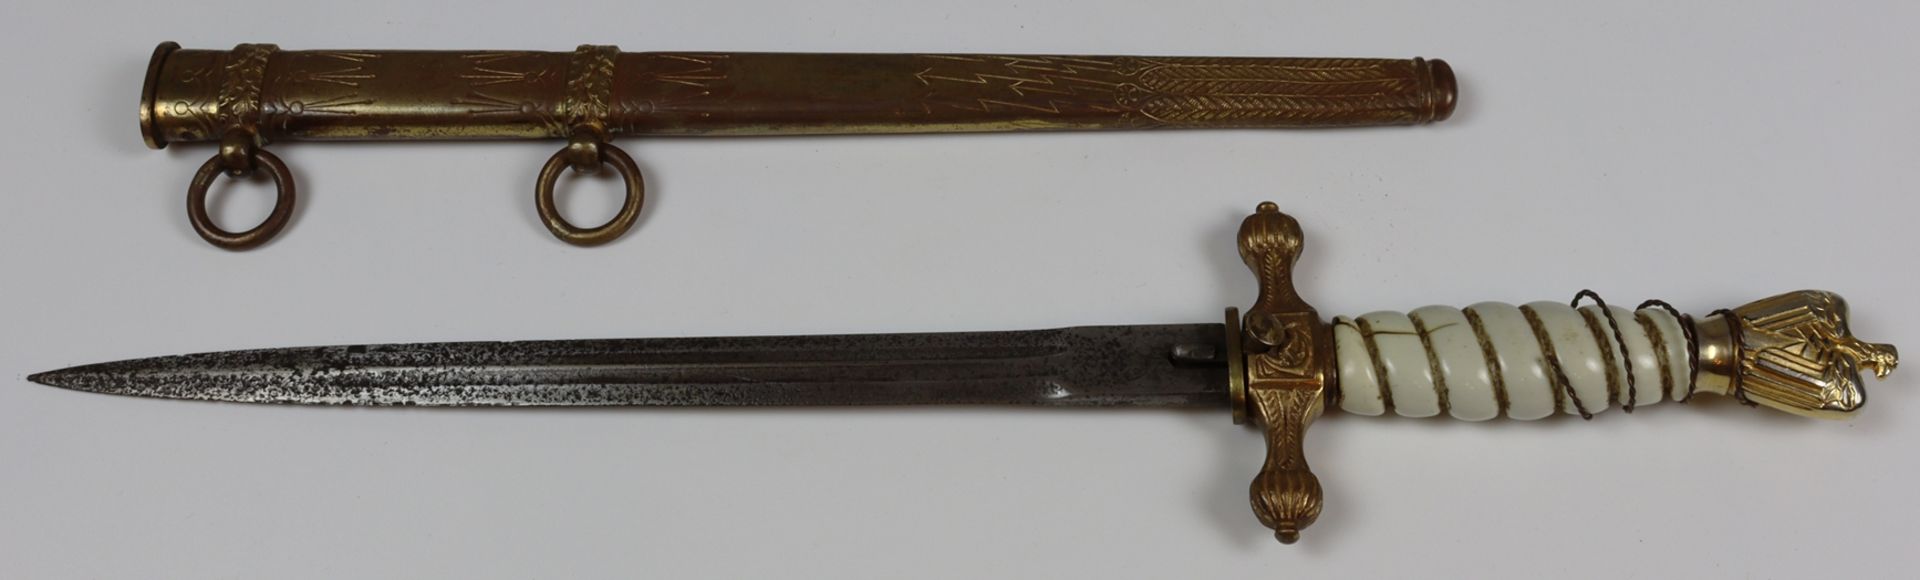 Dagger of the Kriegsmarine of the 3. Reich, 1933-1945 - Image 2 of 7